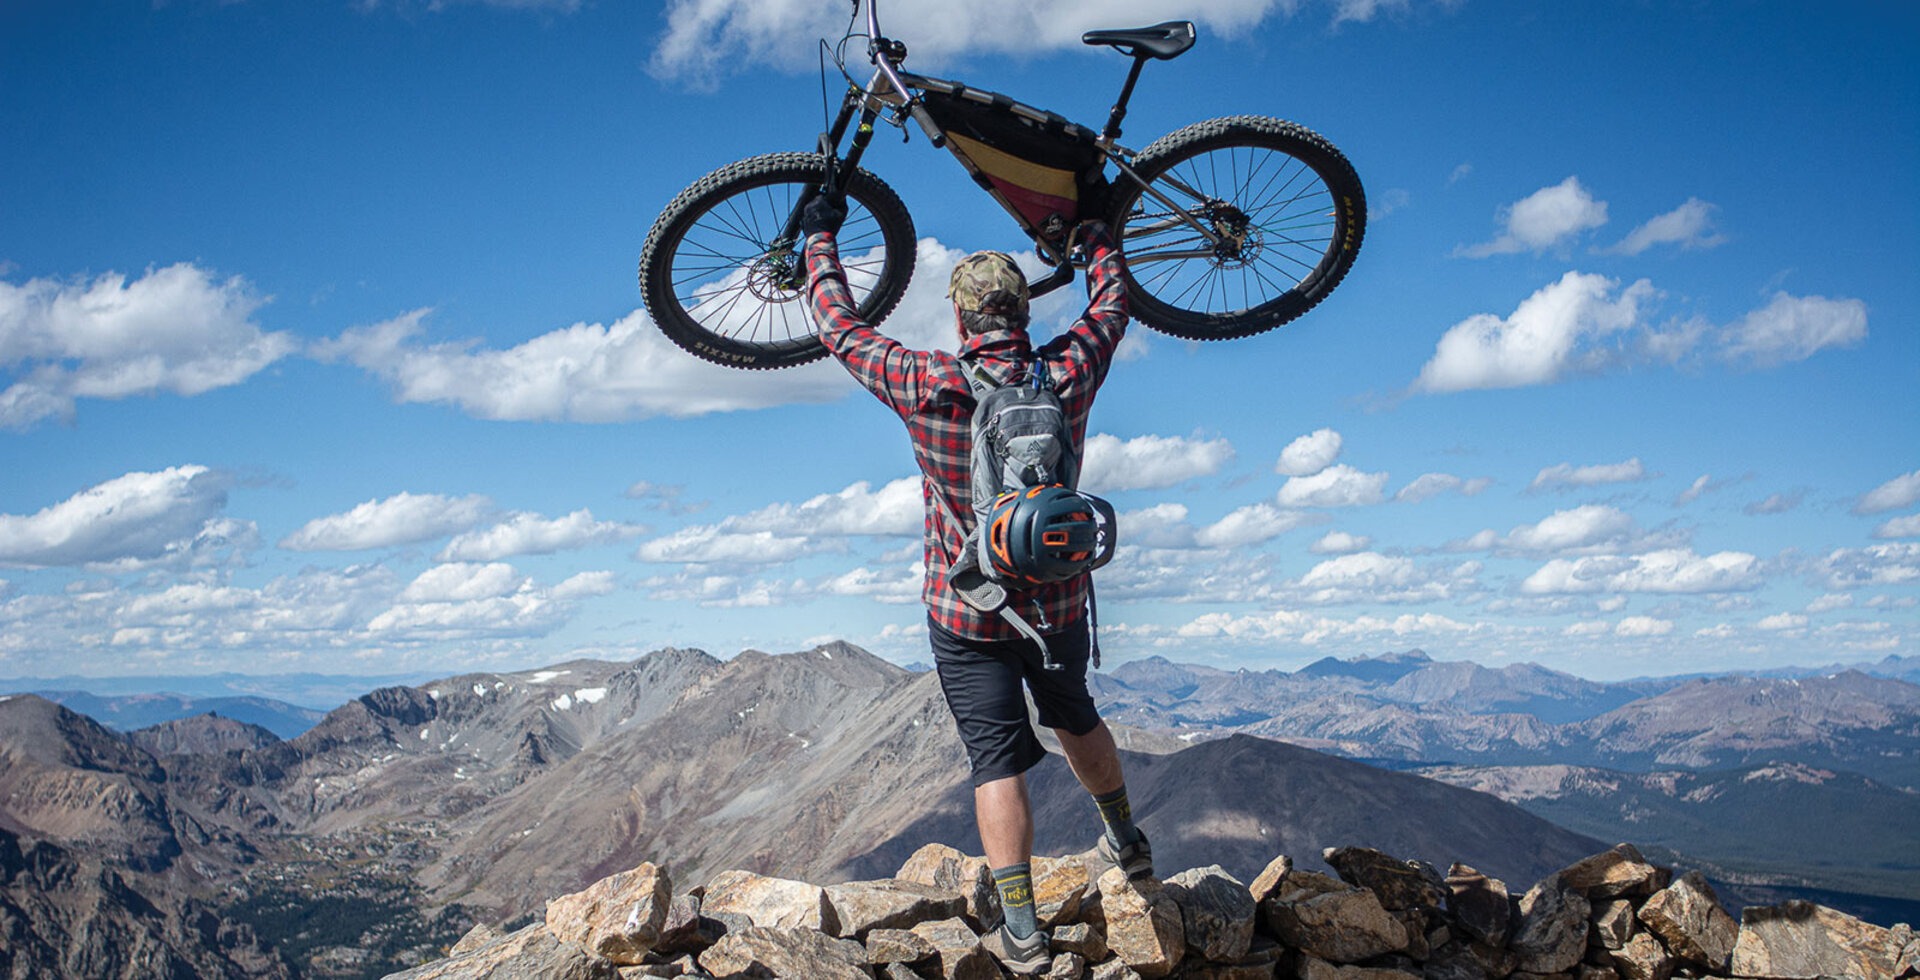 The author, Chris Reichel, heaves his trusty singlespeed above his head after reaching the top of Mount Elbert. Photo: Liz Sampey